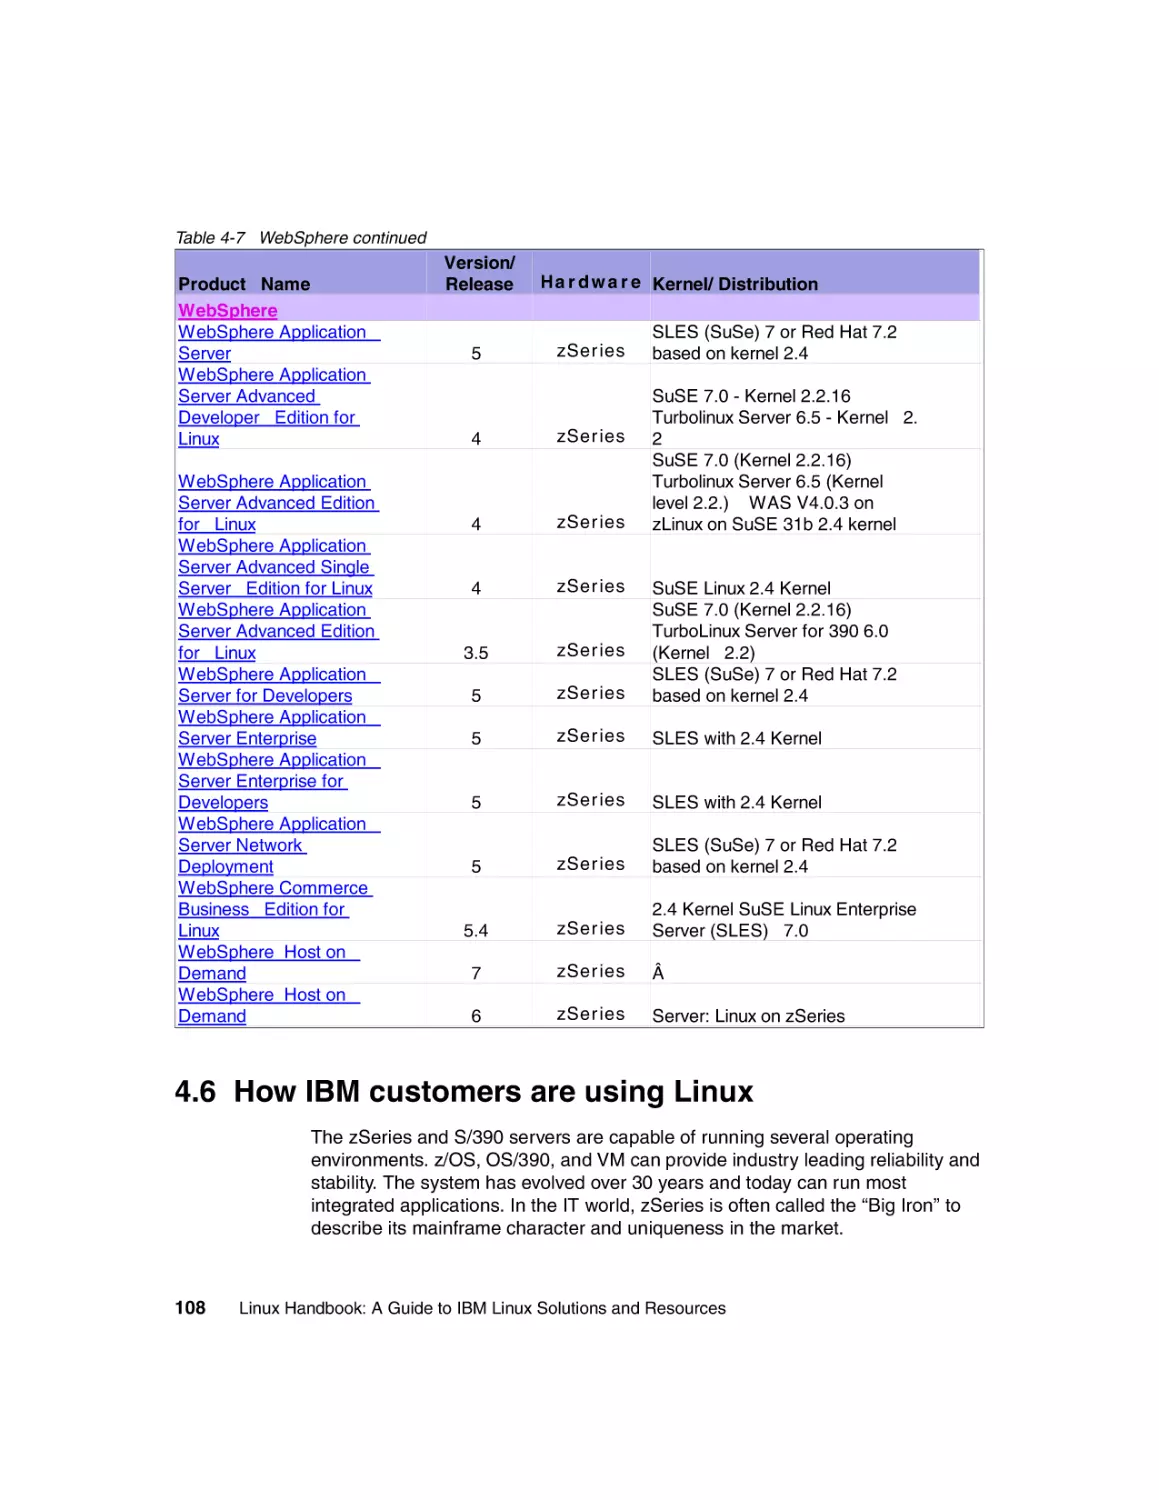 4.6 How IBM customers are using Linux